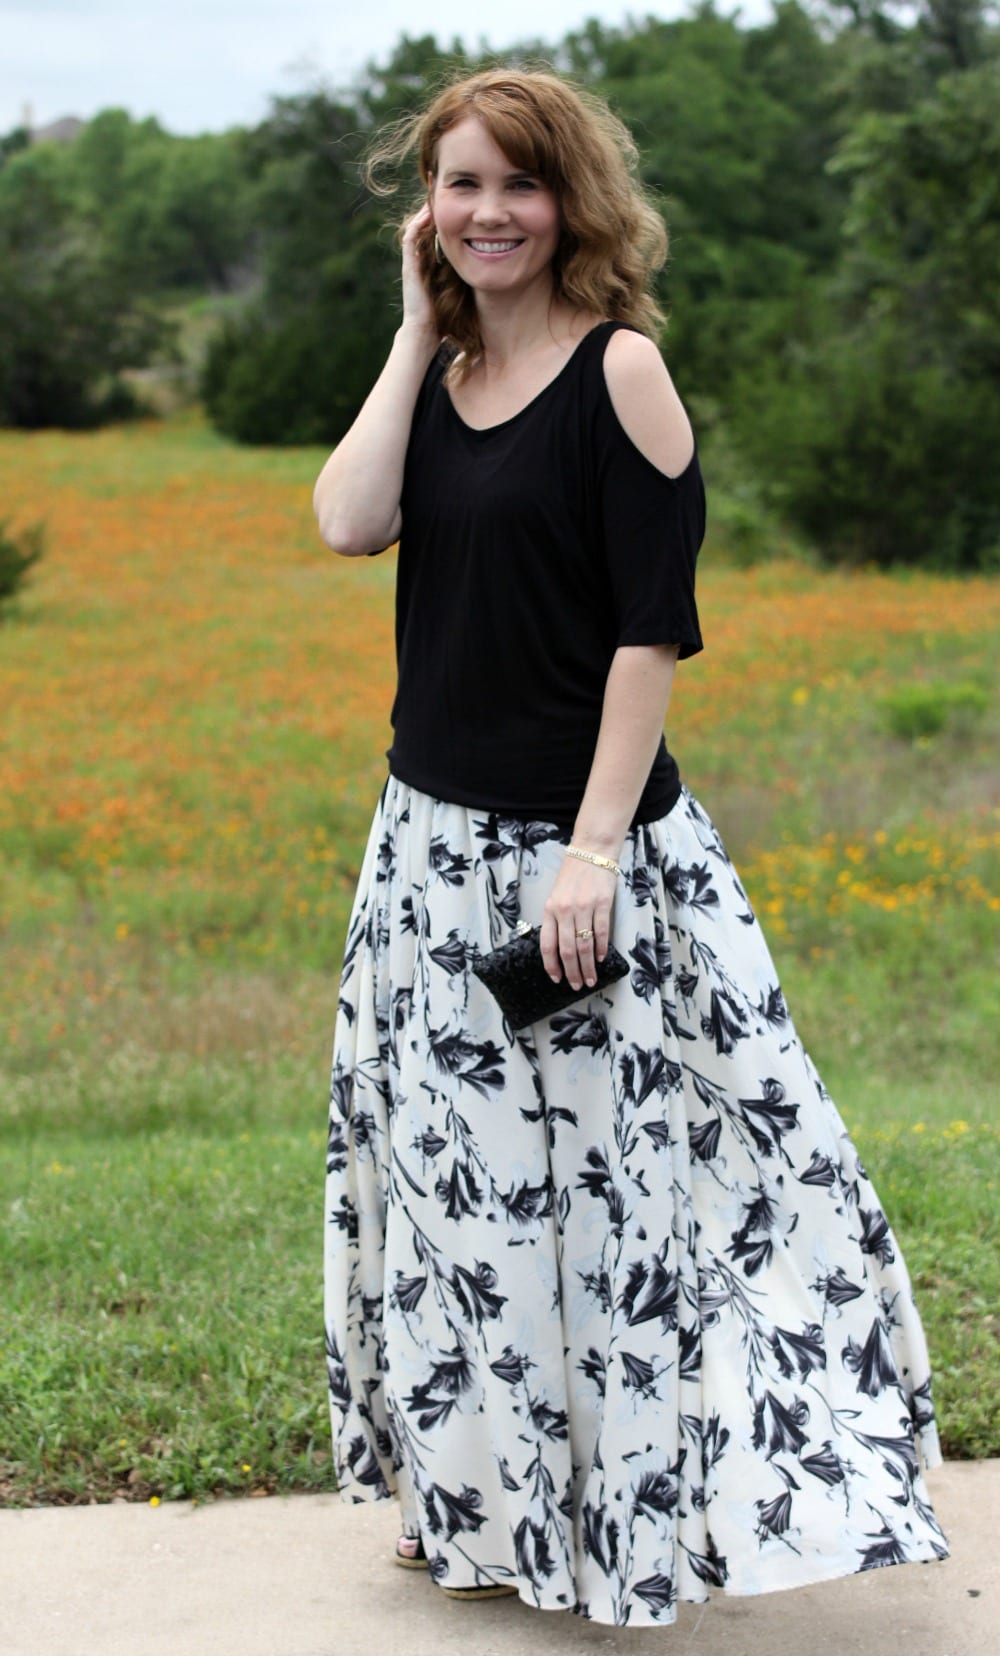 A dressed up maxi skirt outfit - break out the off the shoulder shirt or one with shoulder cutouts, pair it with a maxi skirt, wedges, clutch and some pretty accessories for the perfect date night summer outfit.